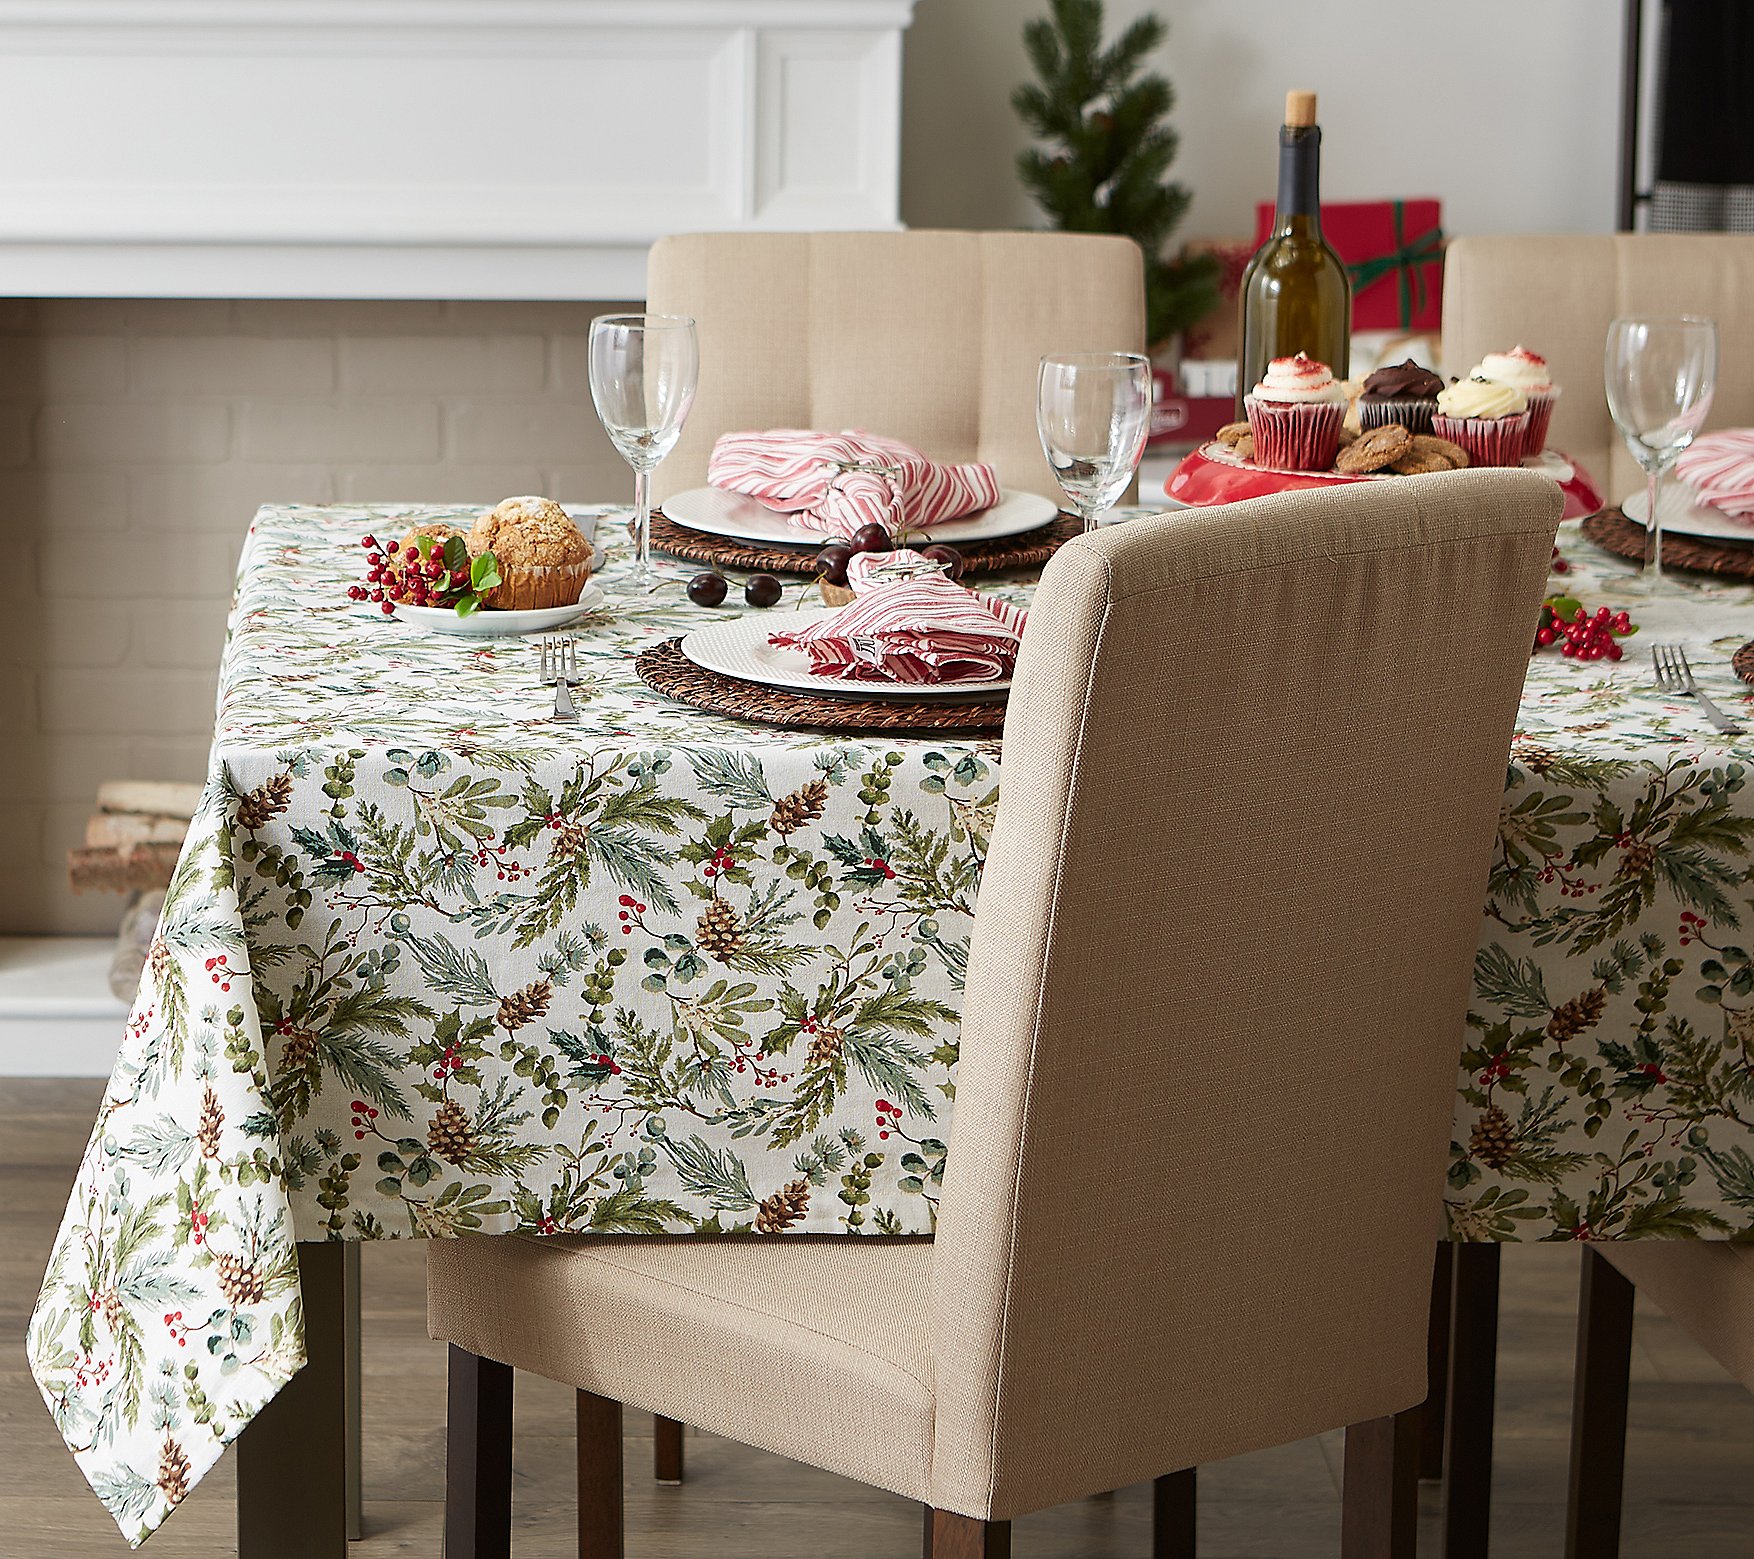 Design Imports Heritage Holiday Sprigs Tablecloth 52